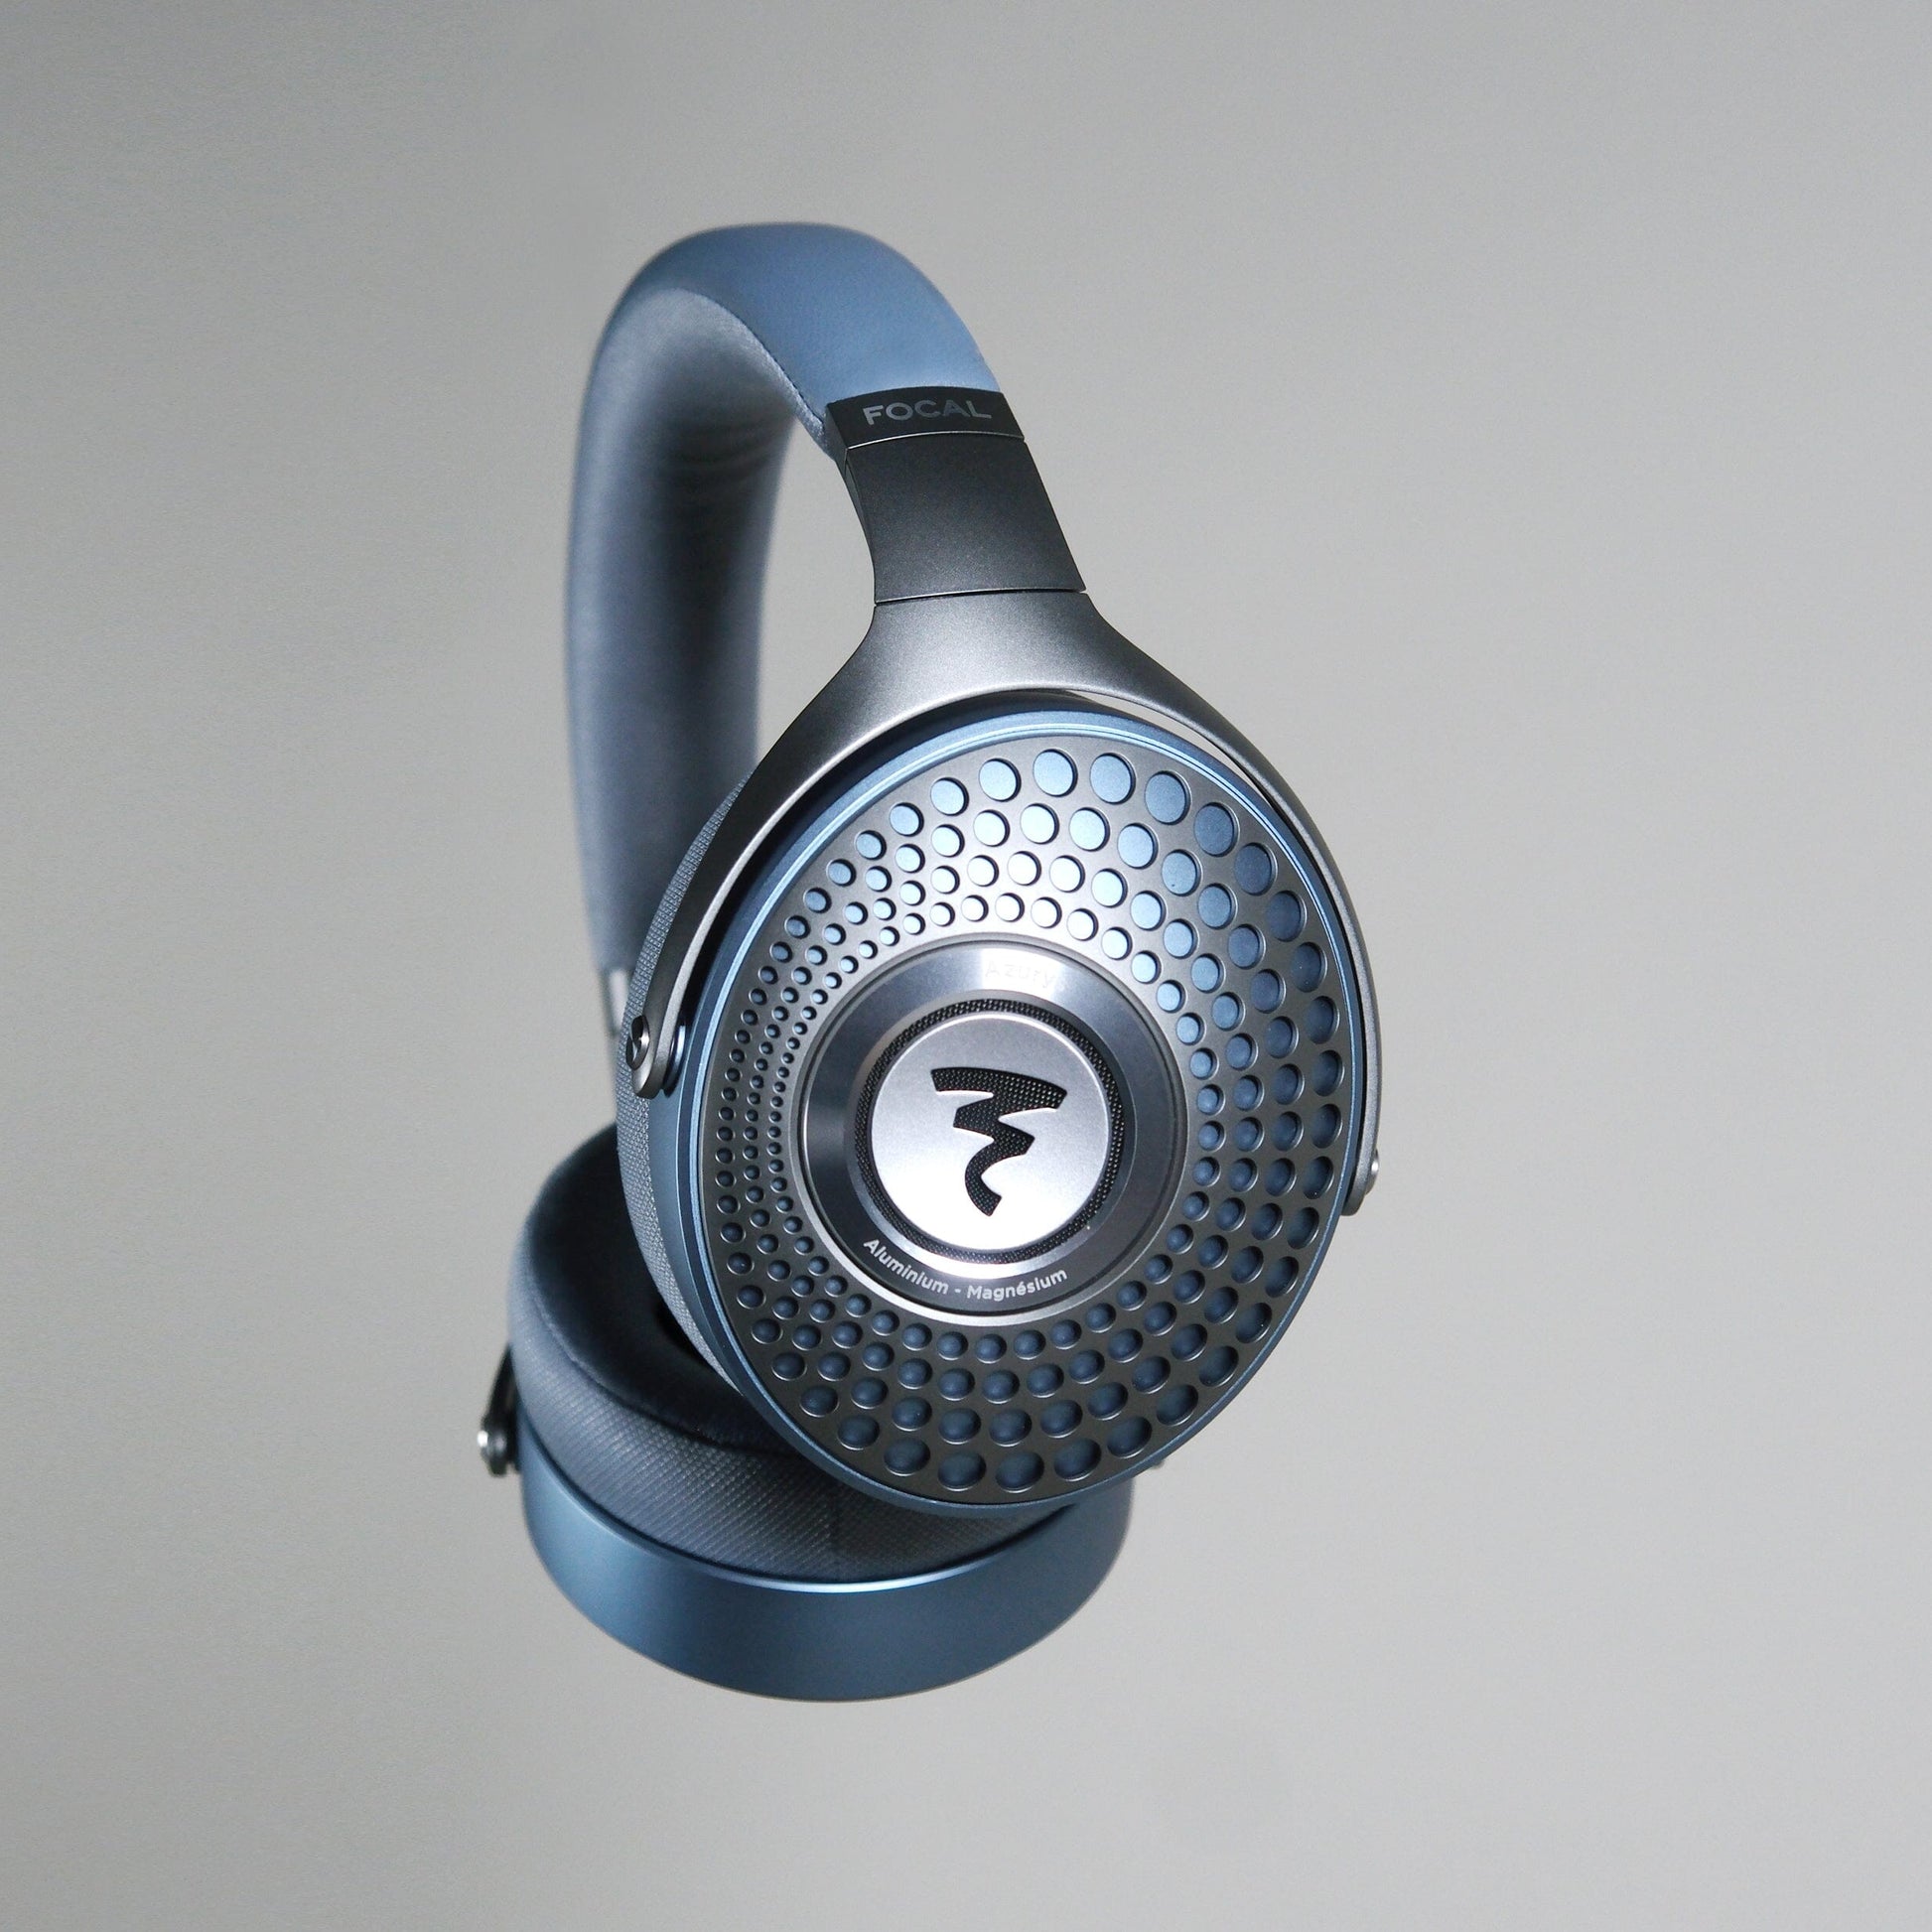 Focal Azurys Closed-Back Dynamic Driver Wired Headphones Made in France - Headphones.com